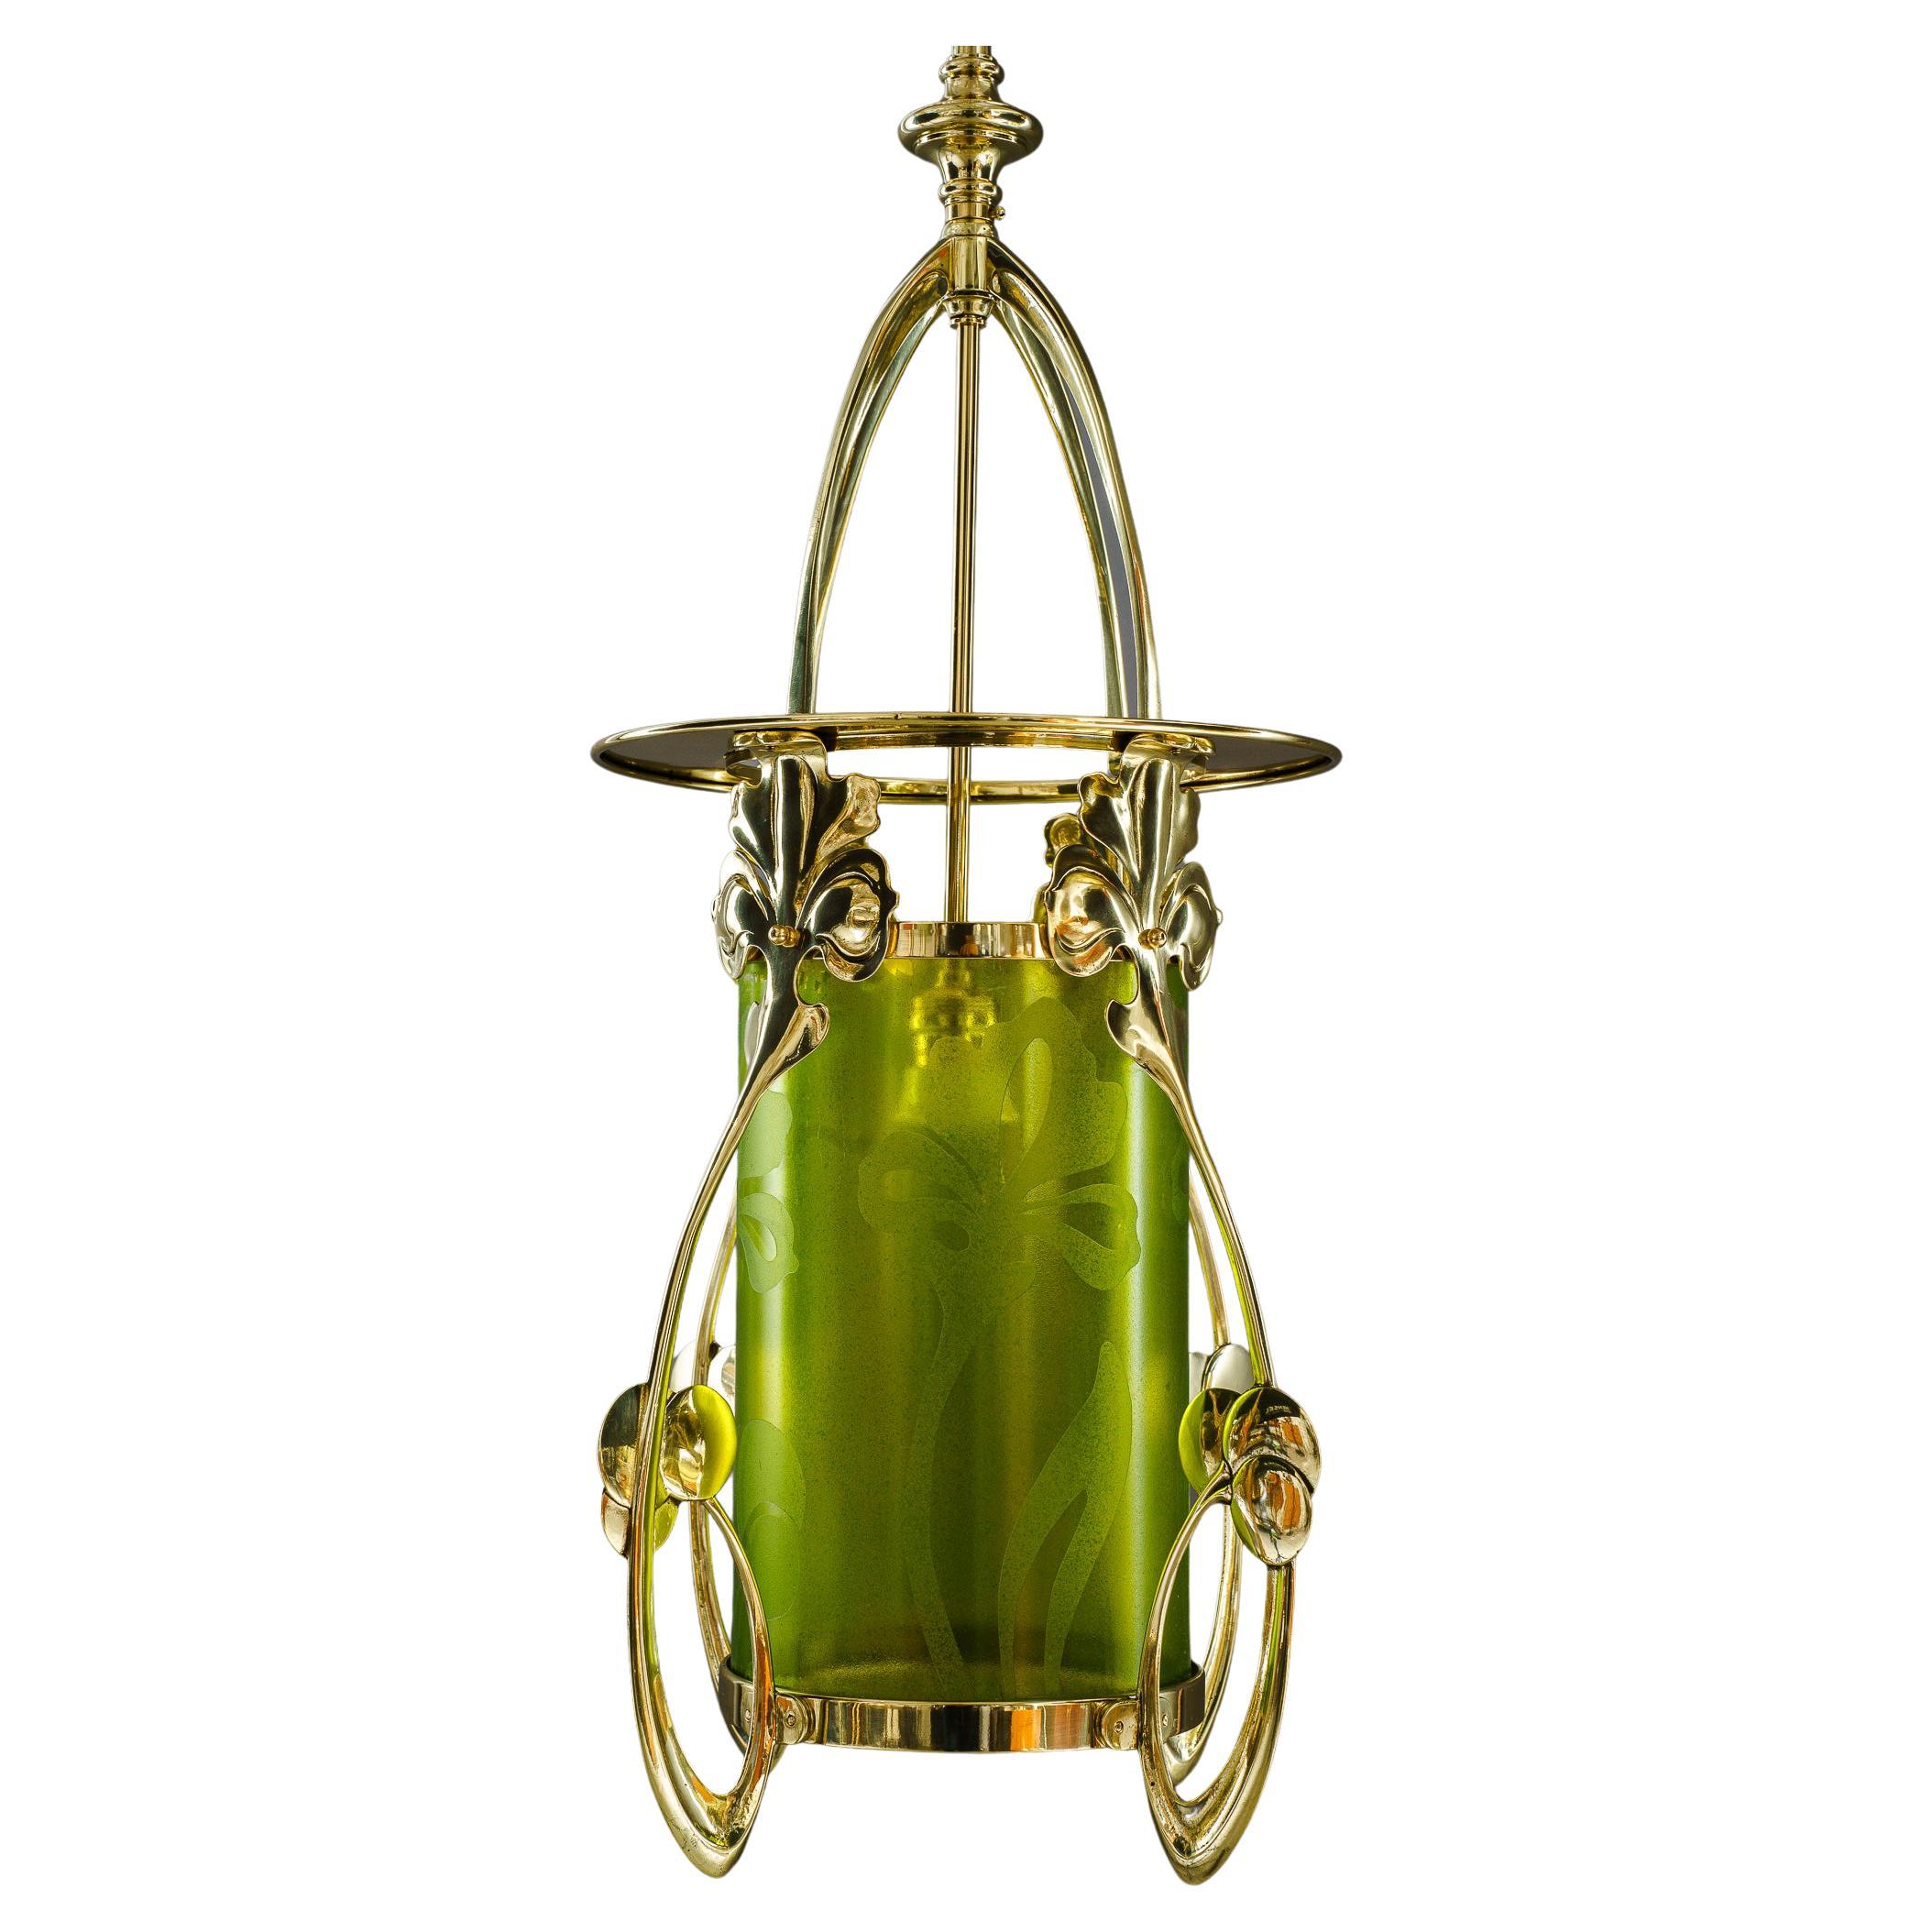 Jugendstil Pendant with hand painted glass shade vienna around 1908